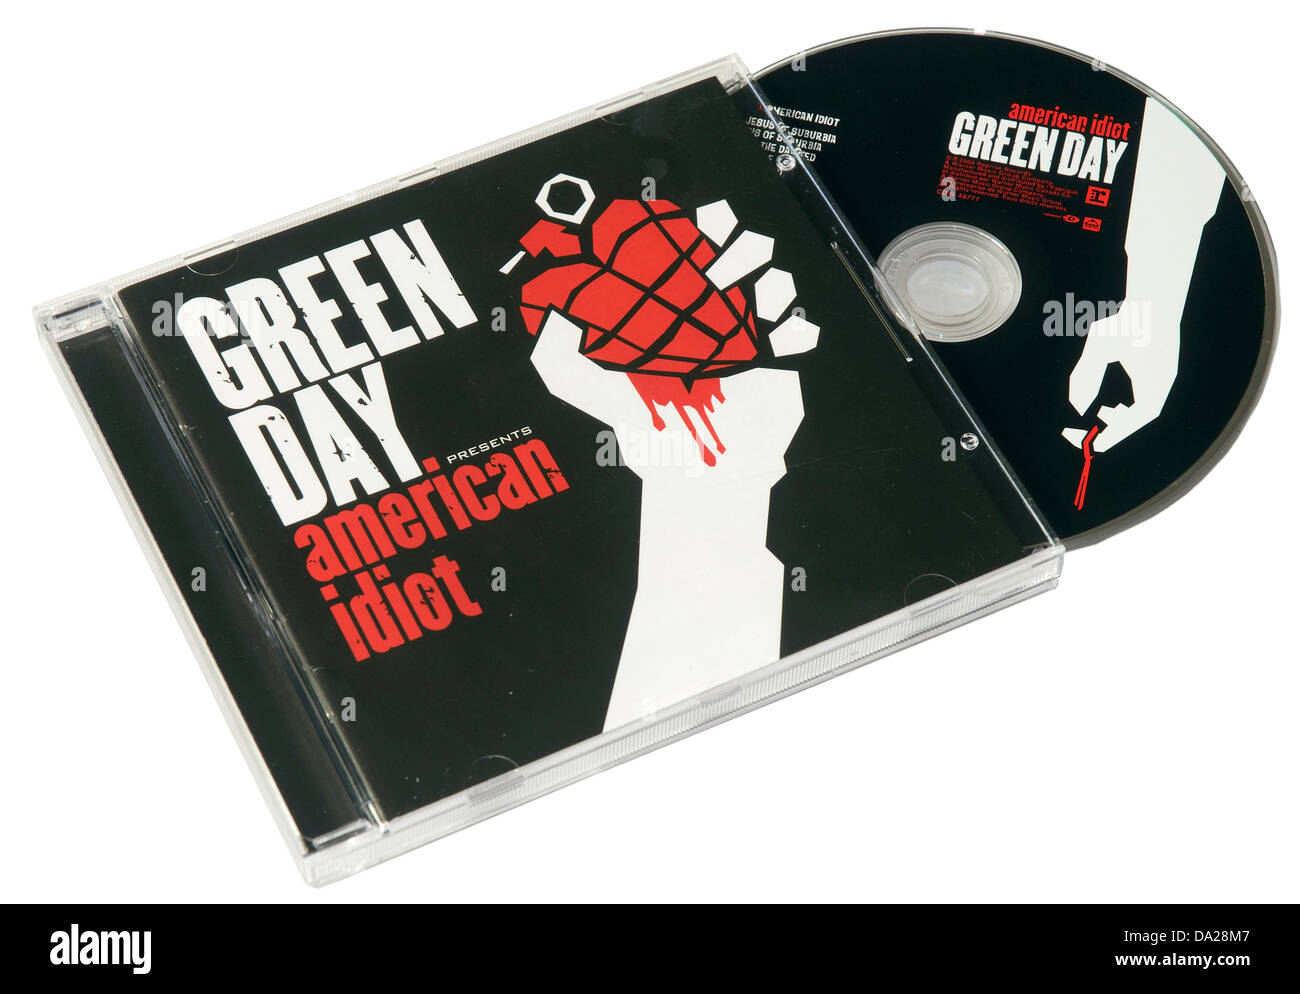 Green Day Stock Photos Green Day Stock Images Alamy